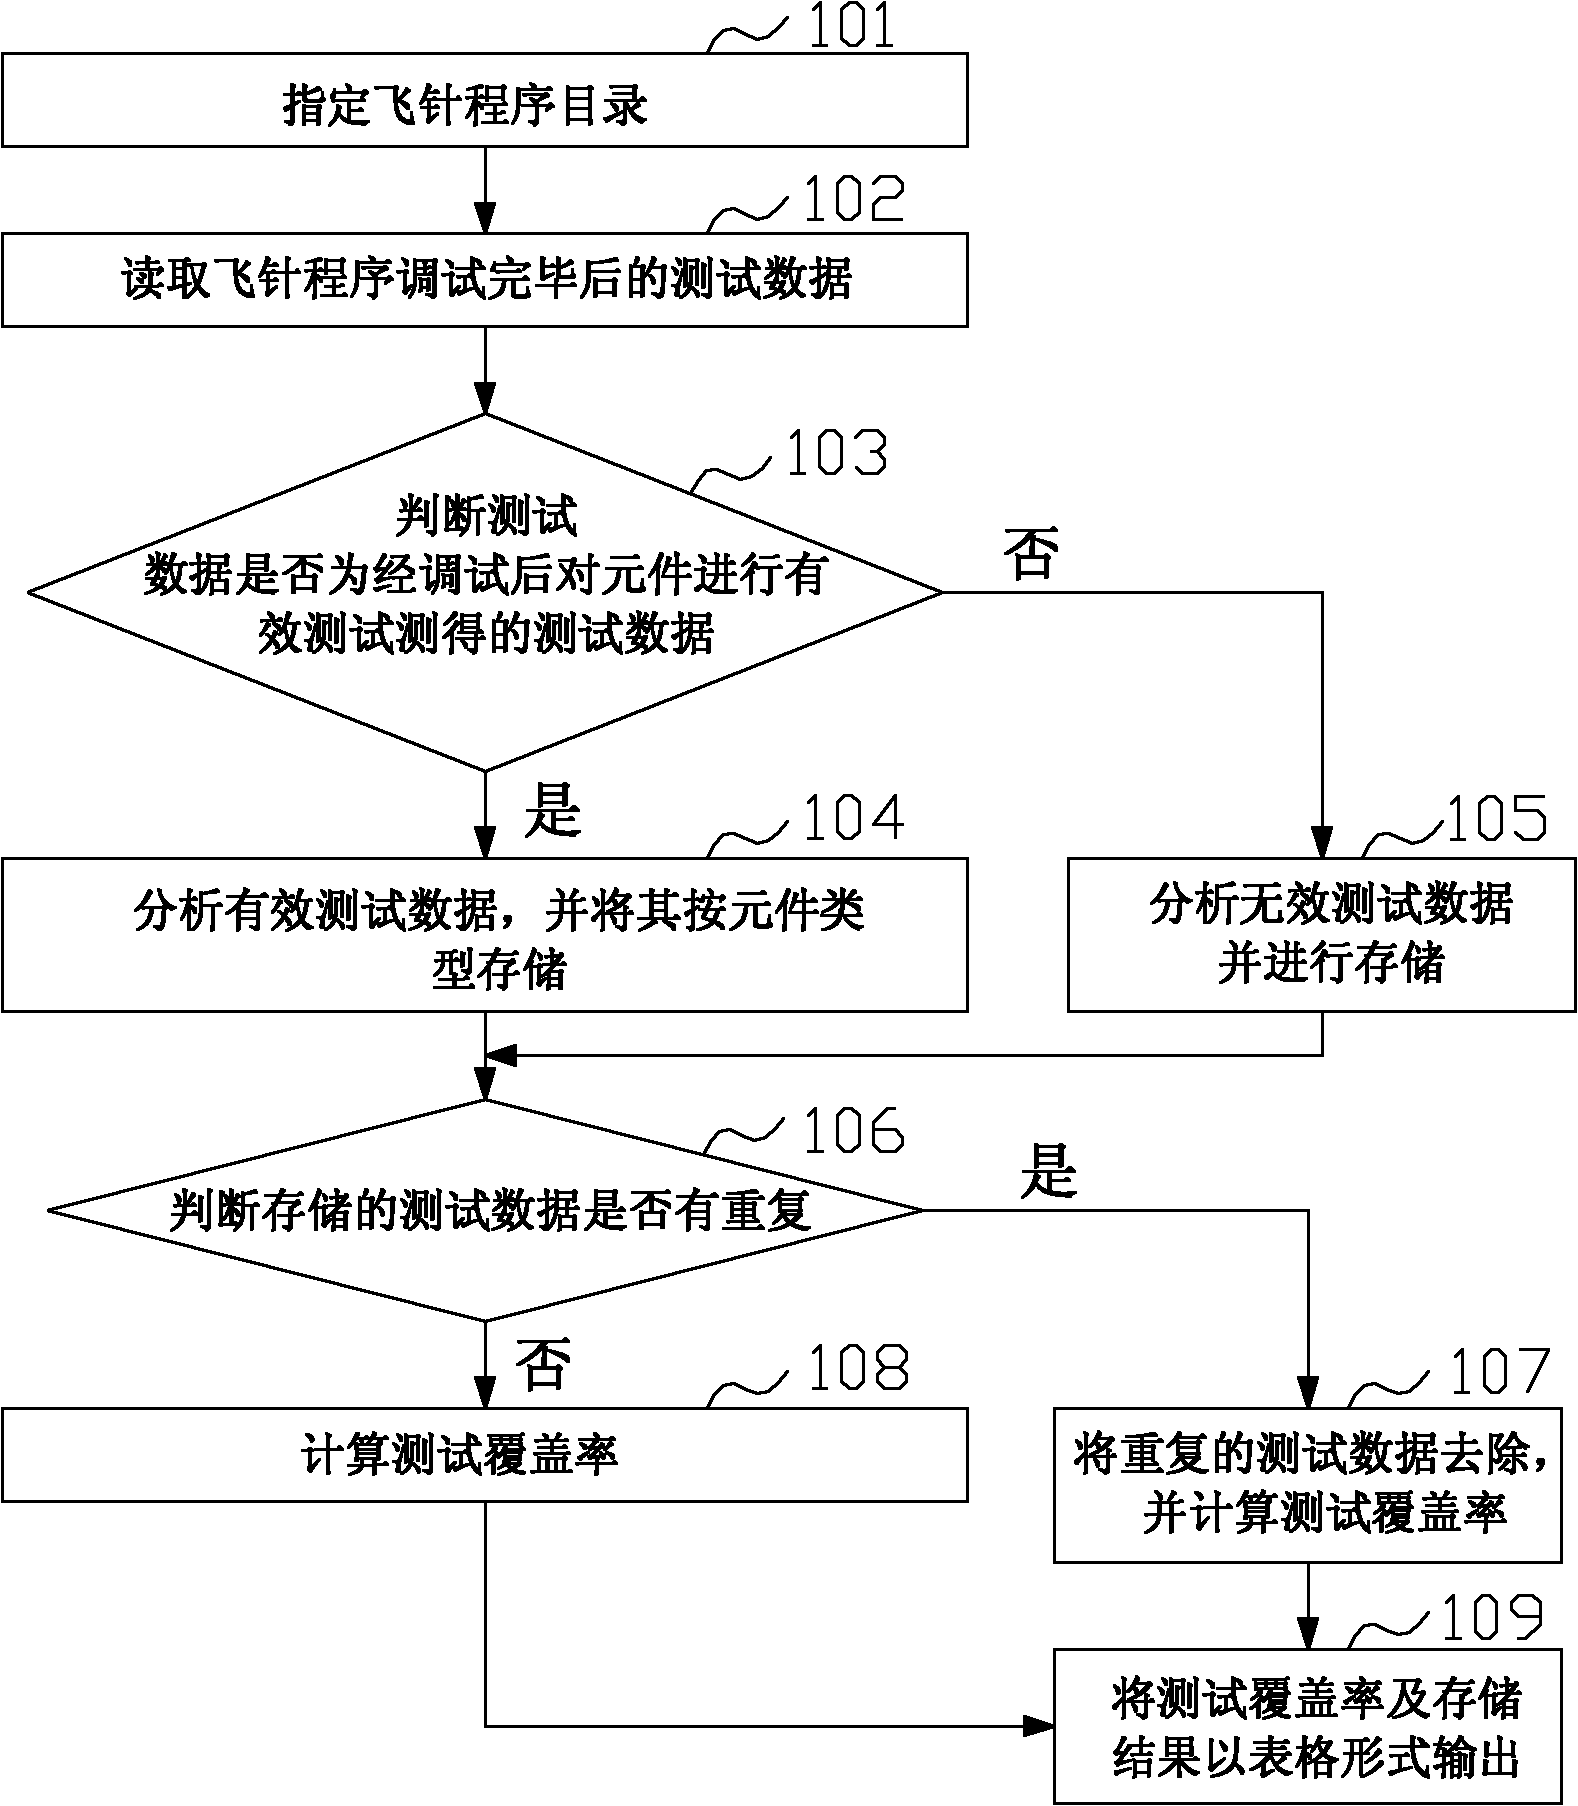 Method for automatically generating test coverage rate of flying probe test program